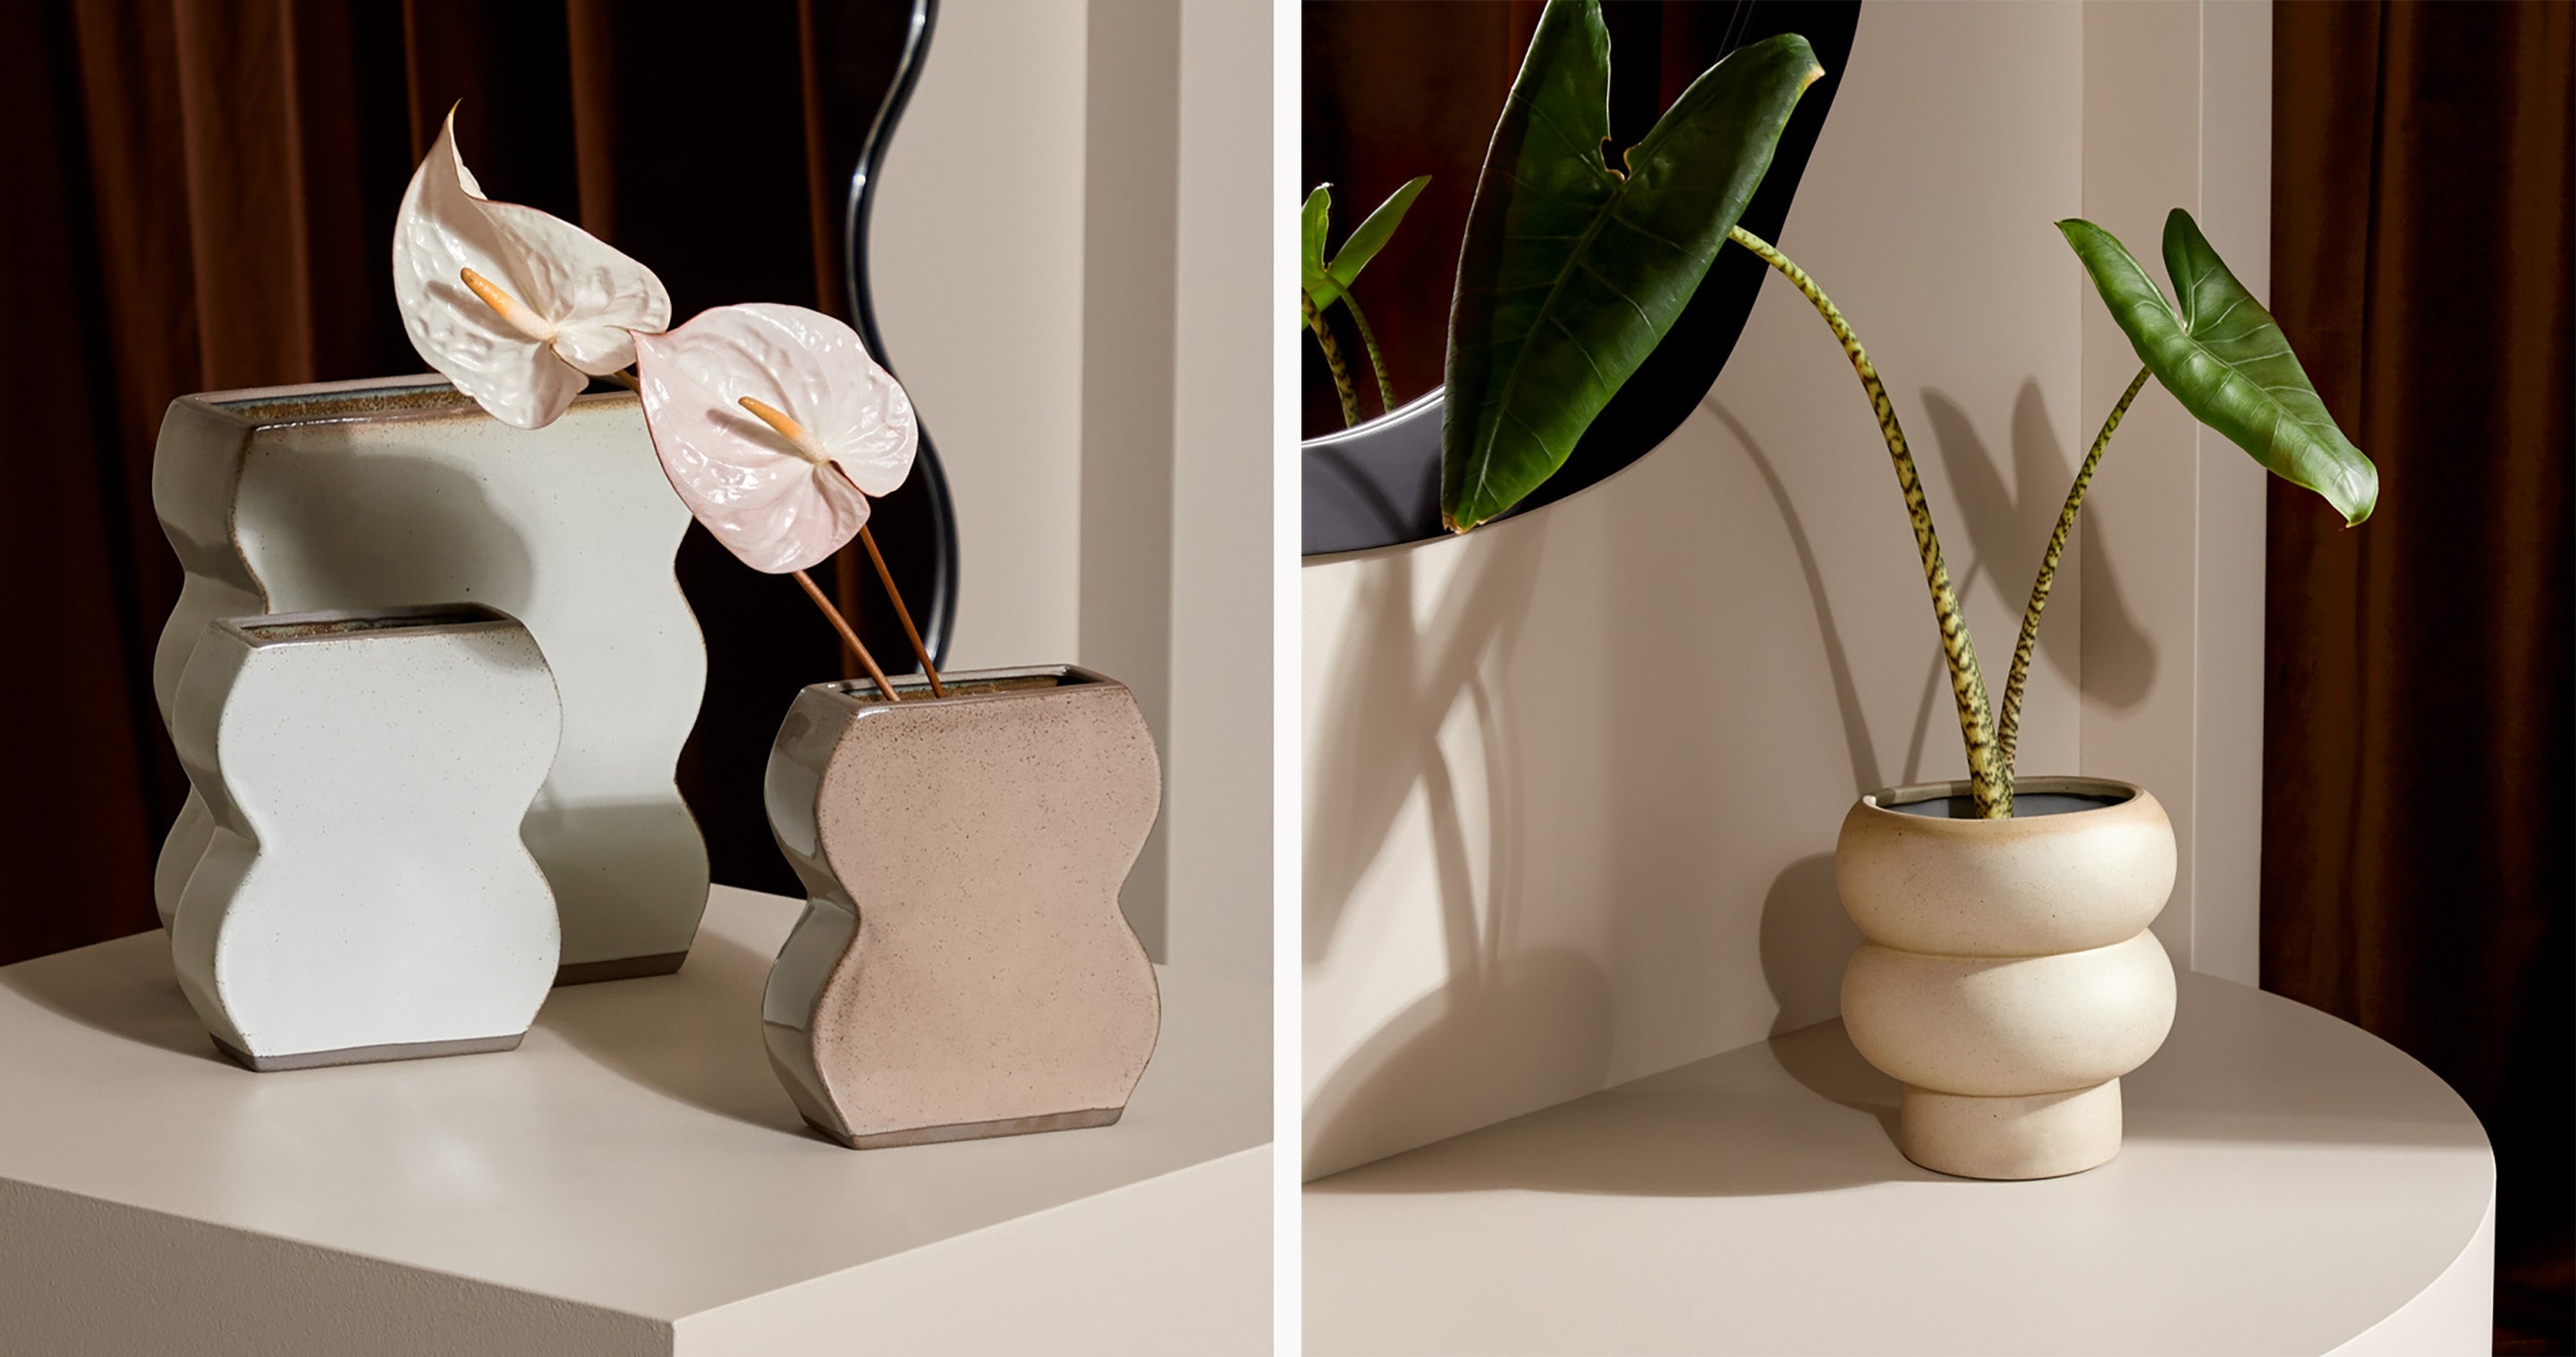 Middle of Nowhere's new range of planters and vases